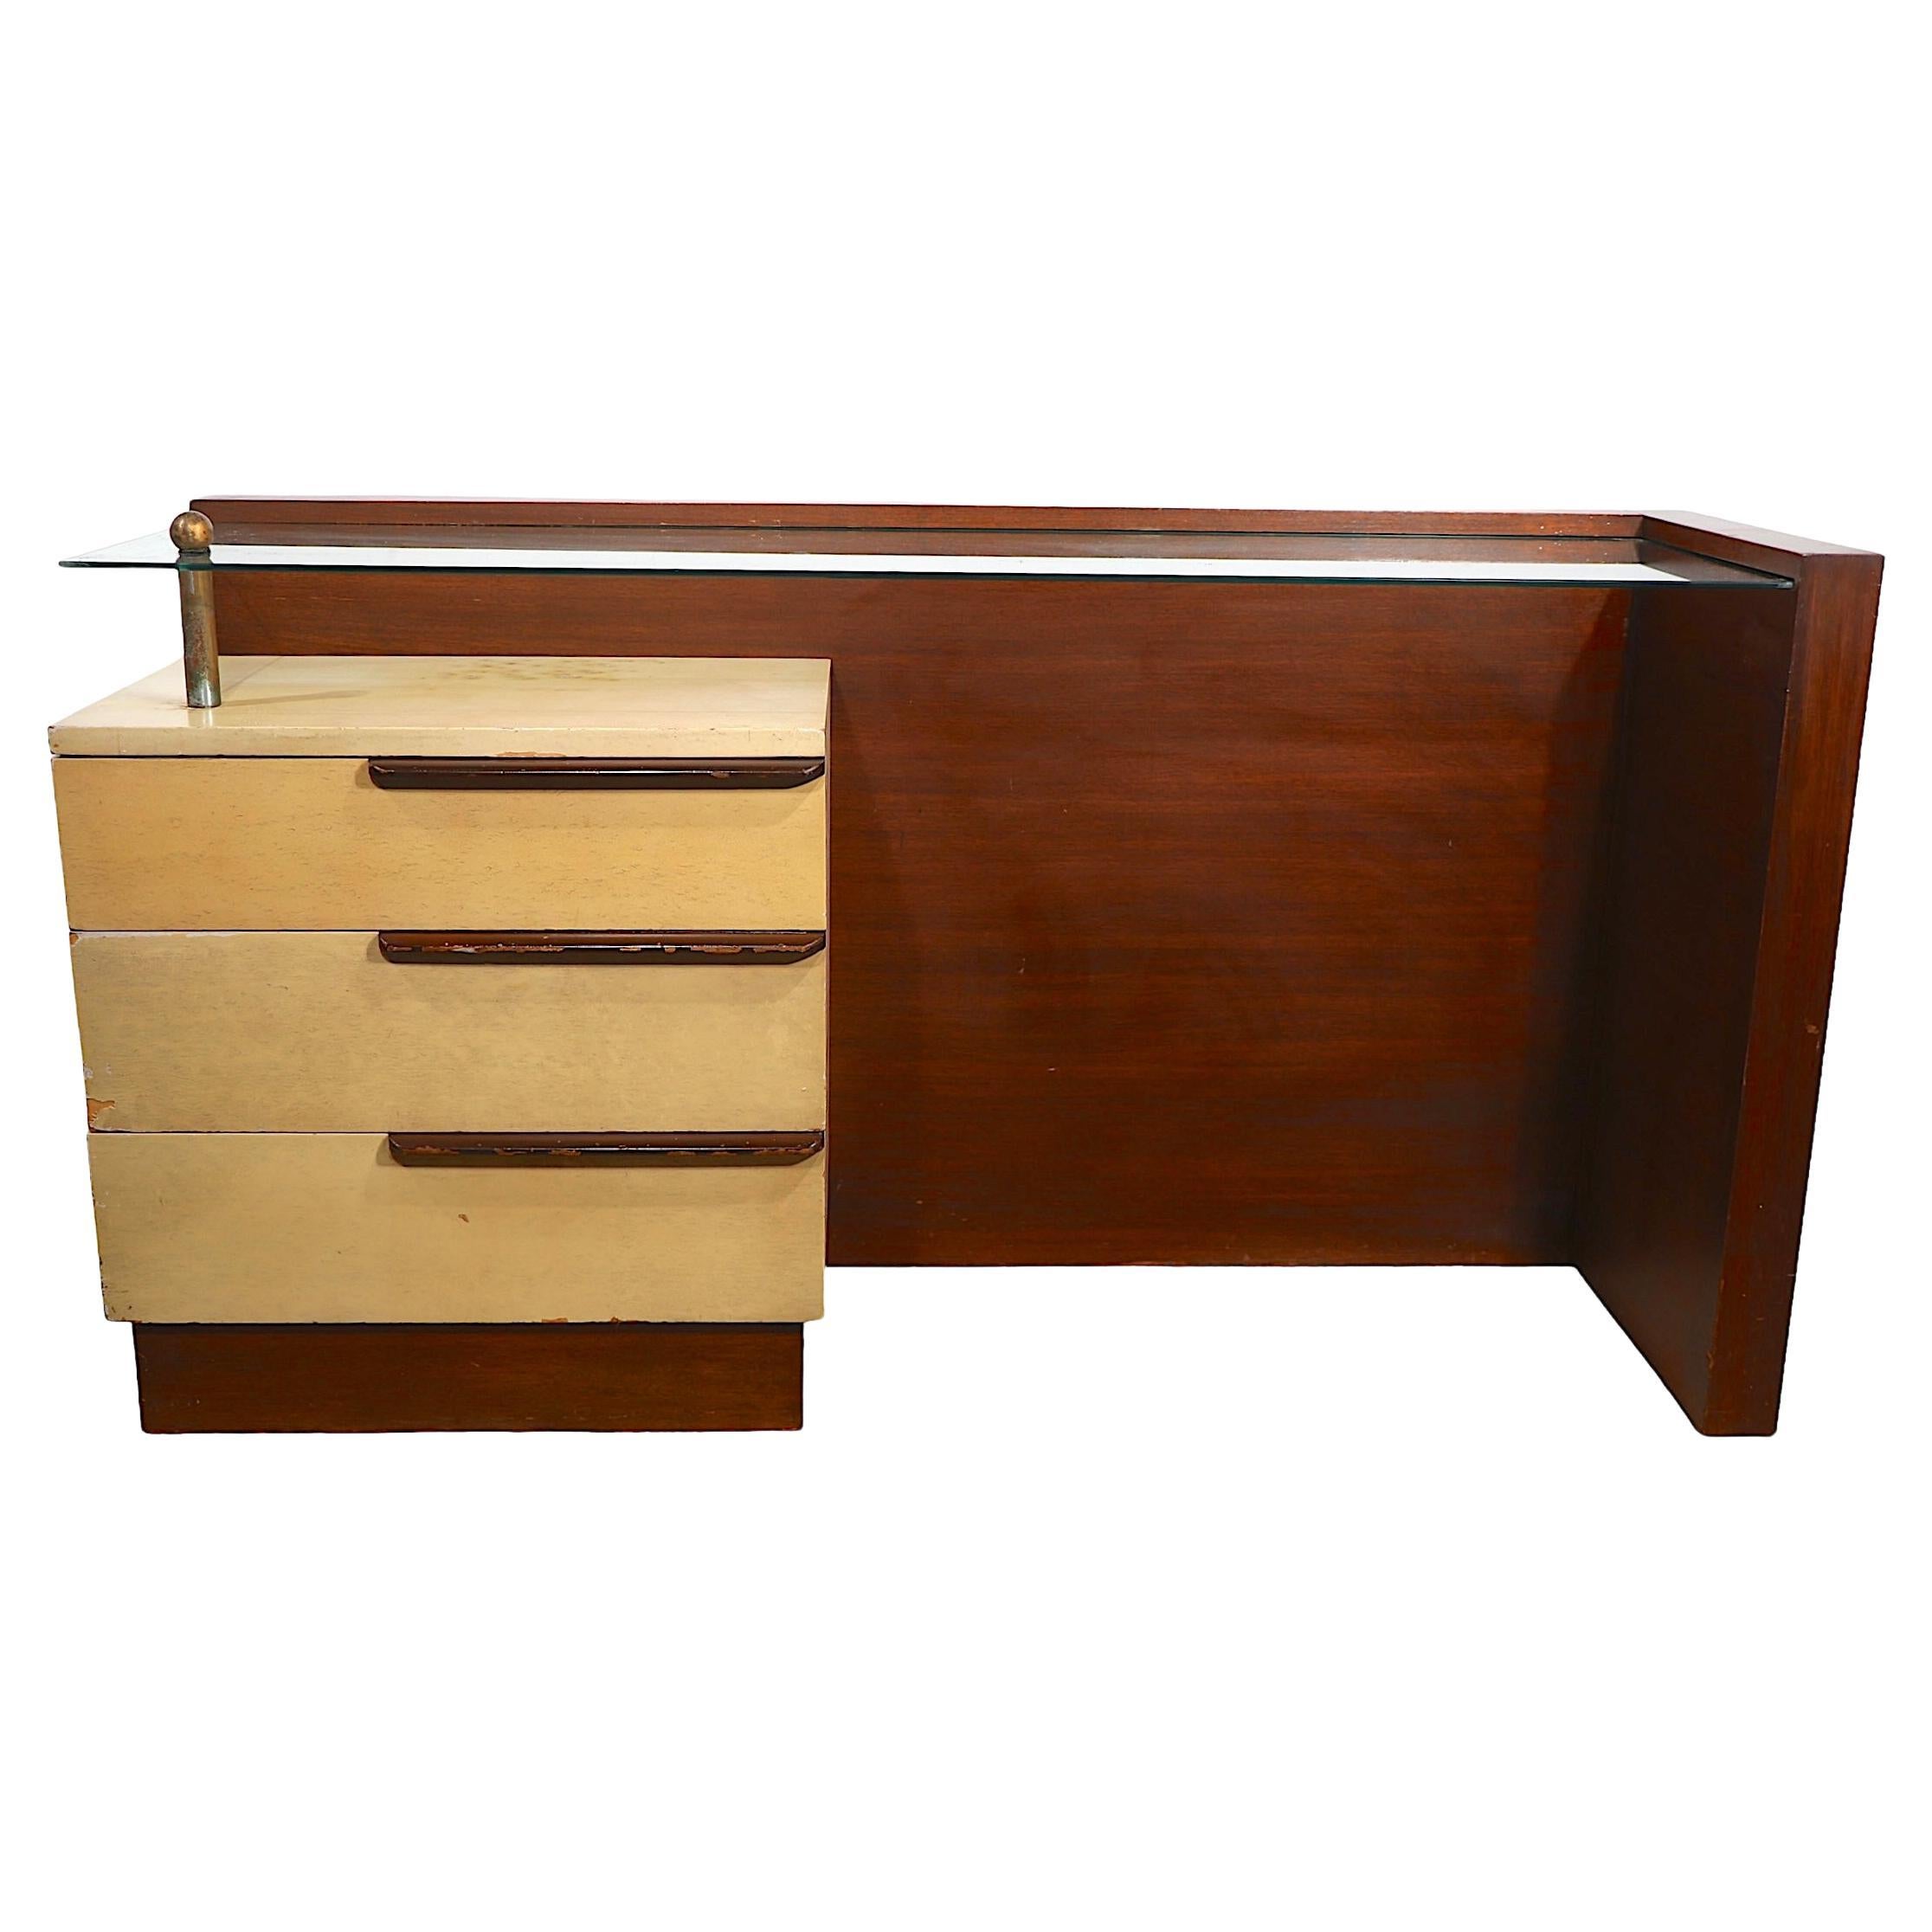 Iconic Art Deco, Art Moderne vanity designed by Gilbert Rohde for Herman Miller, circa 1936. The vanity features a bank of three drawers, which supports a floating glass top surface, that extends the width of the vanity and is framed by  a walnut